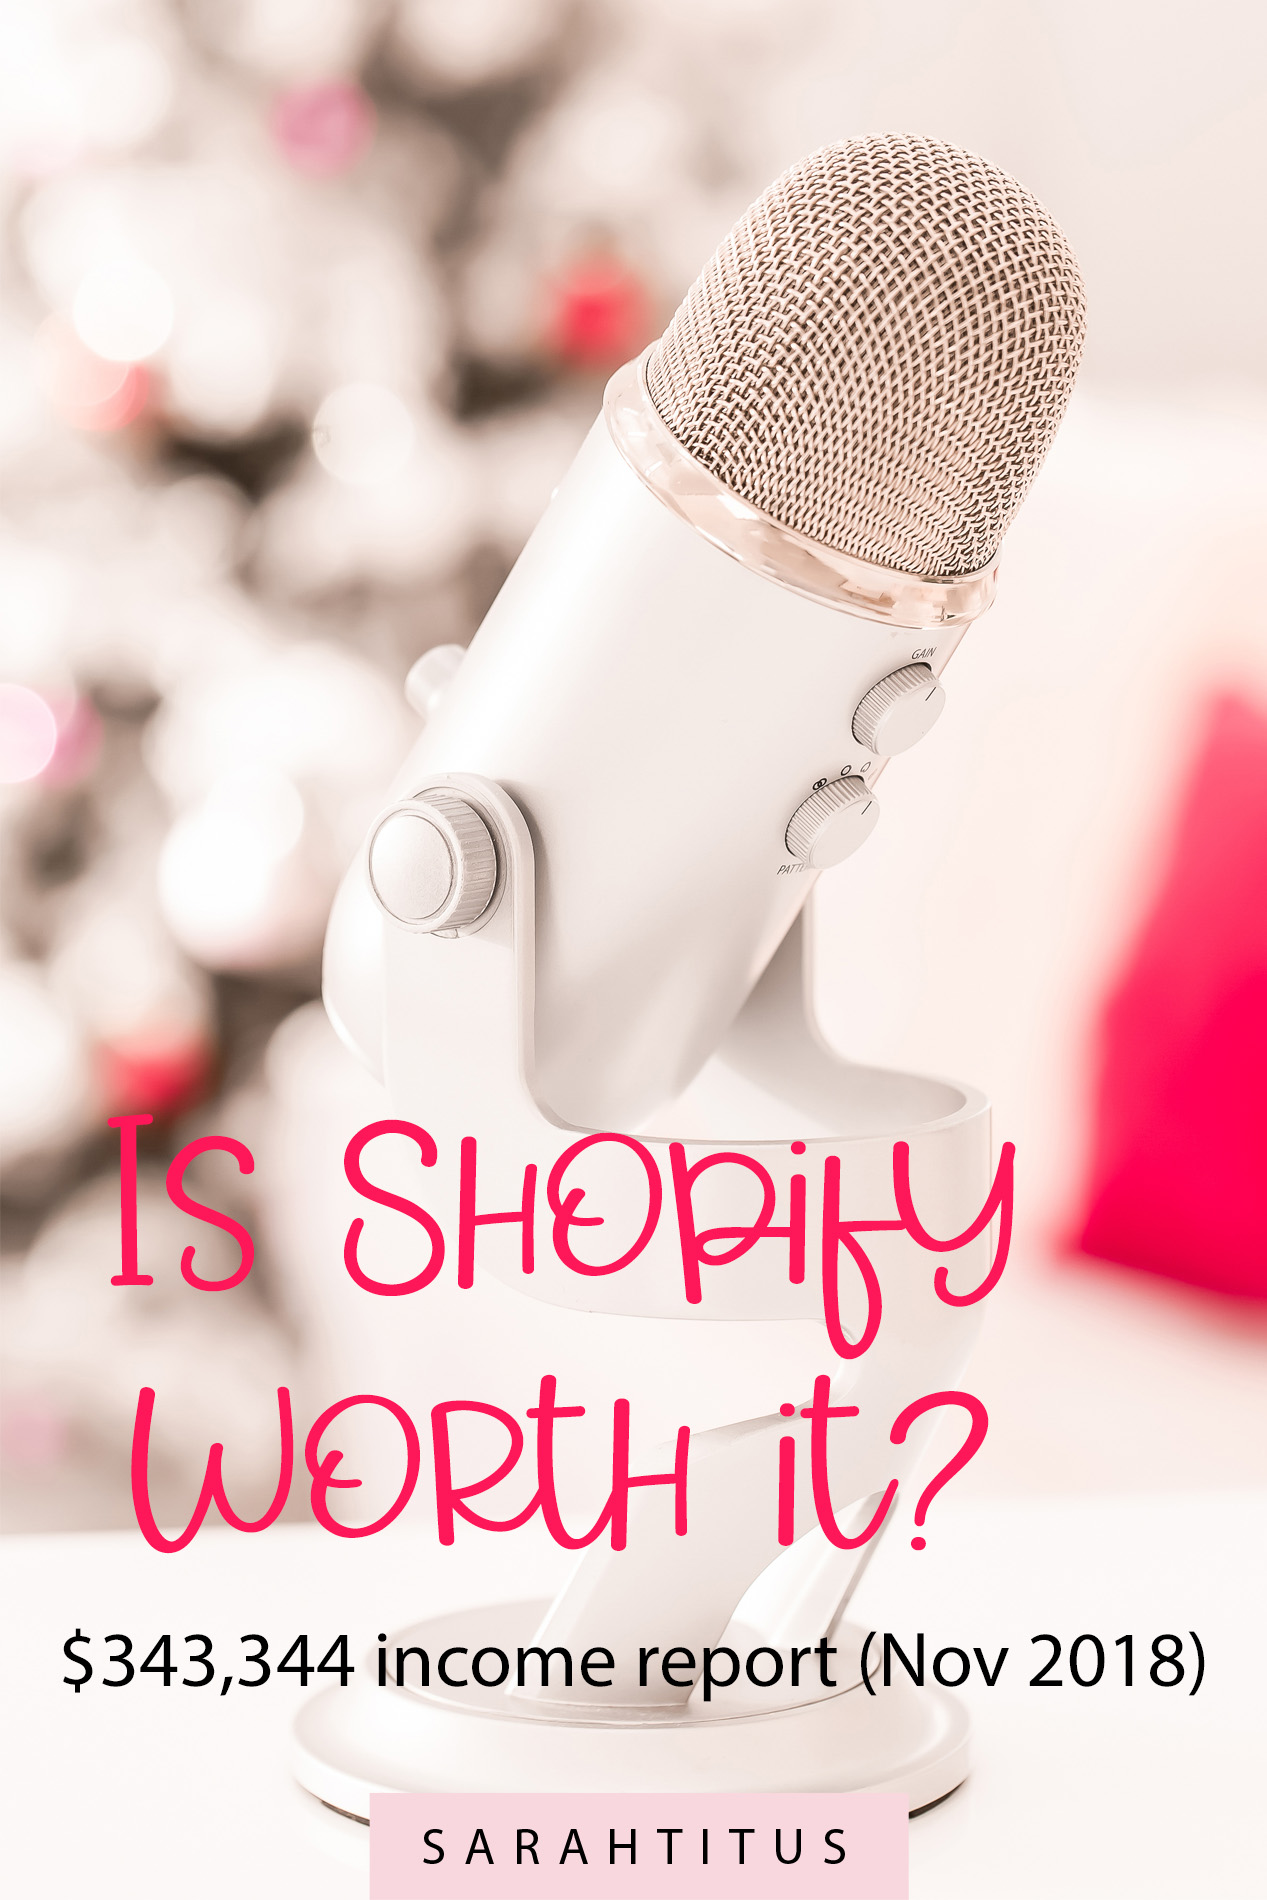 Is Shopify worth it? Considering I make $2.7 million/year in my Shopify store selling digital products on autopilot, I'd say HECK YAH! Check out my most recent income report. #shopifyincomereport #incomereport #isshopifyworthit #milliondollarshop